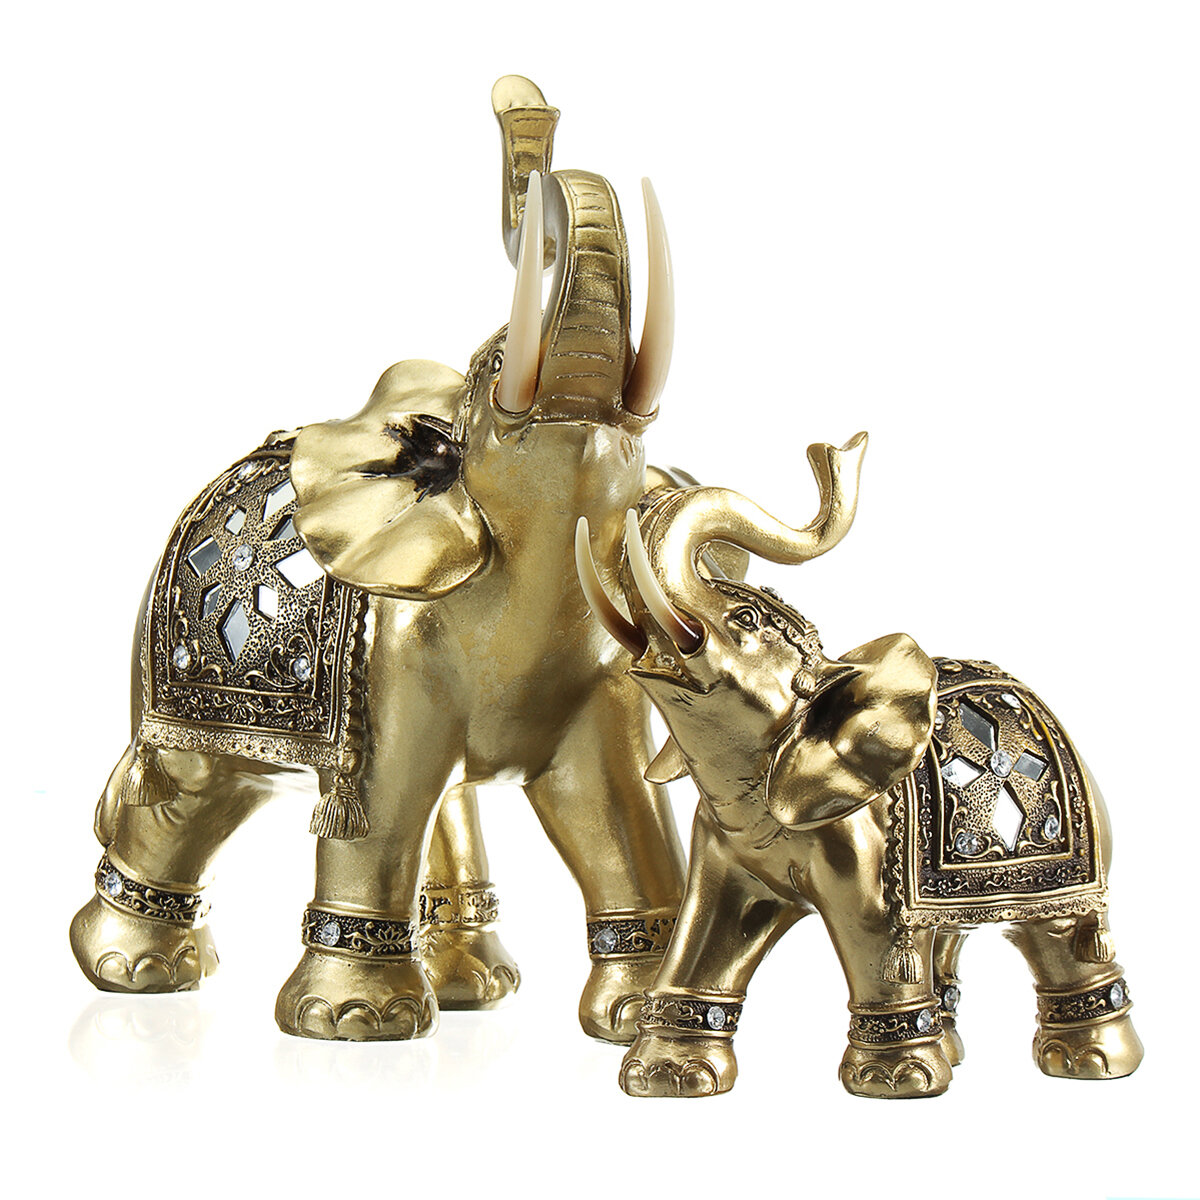 Lucky Charm Fengshui Mascot Golden Elephant Resin Mini Statue Home Desk Ornaments Gifts Home Decorat